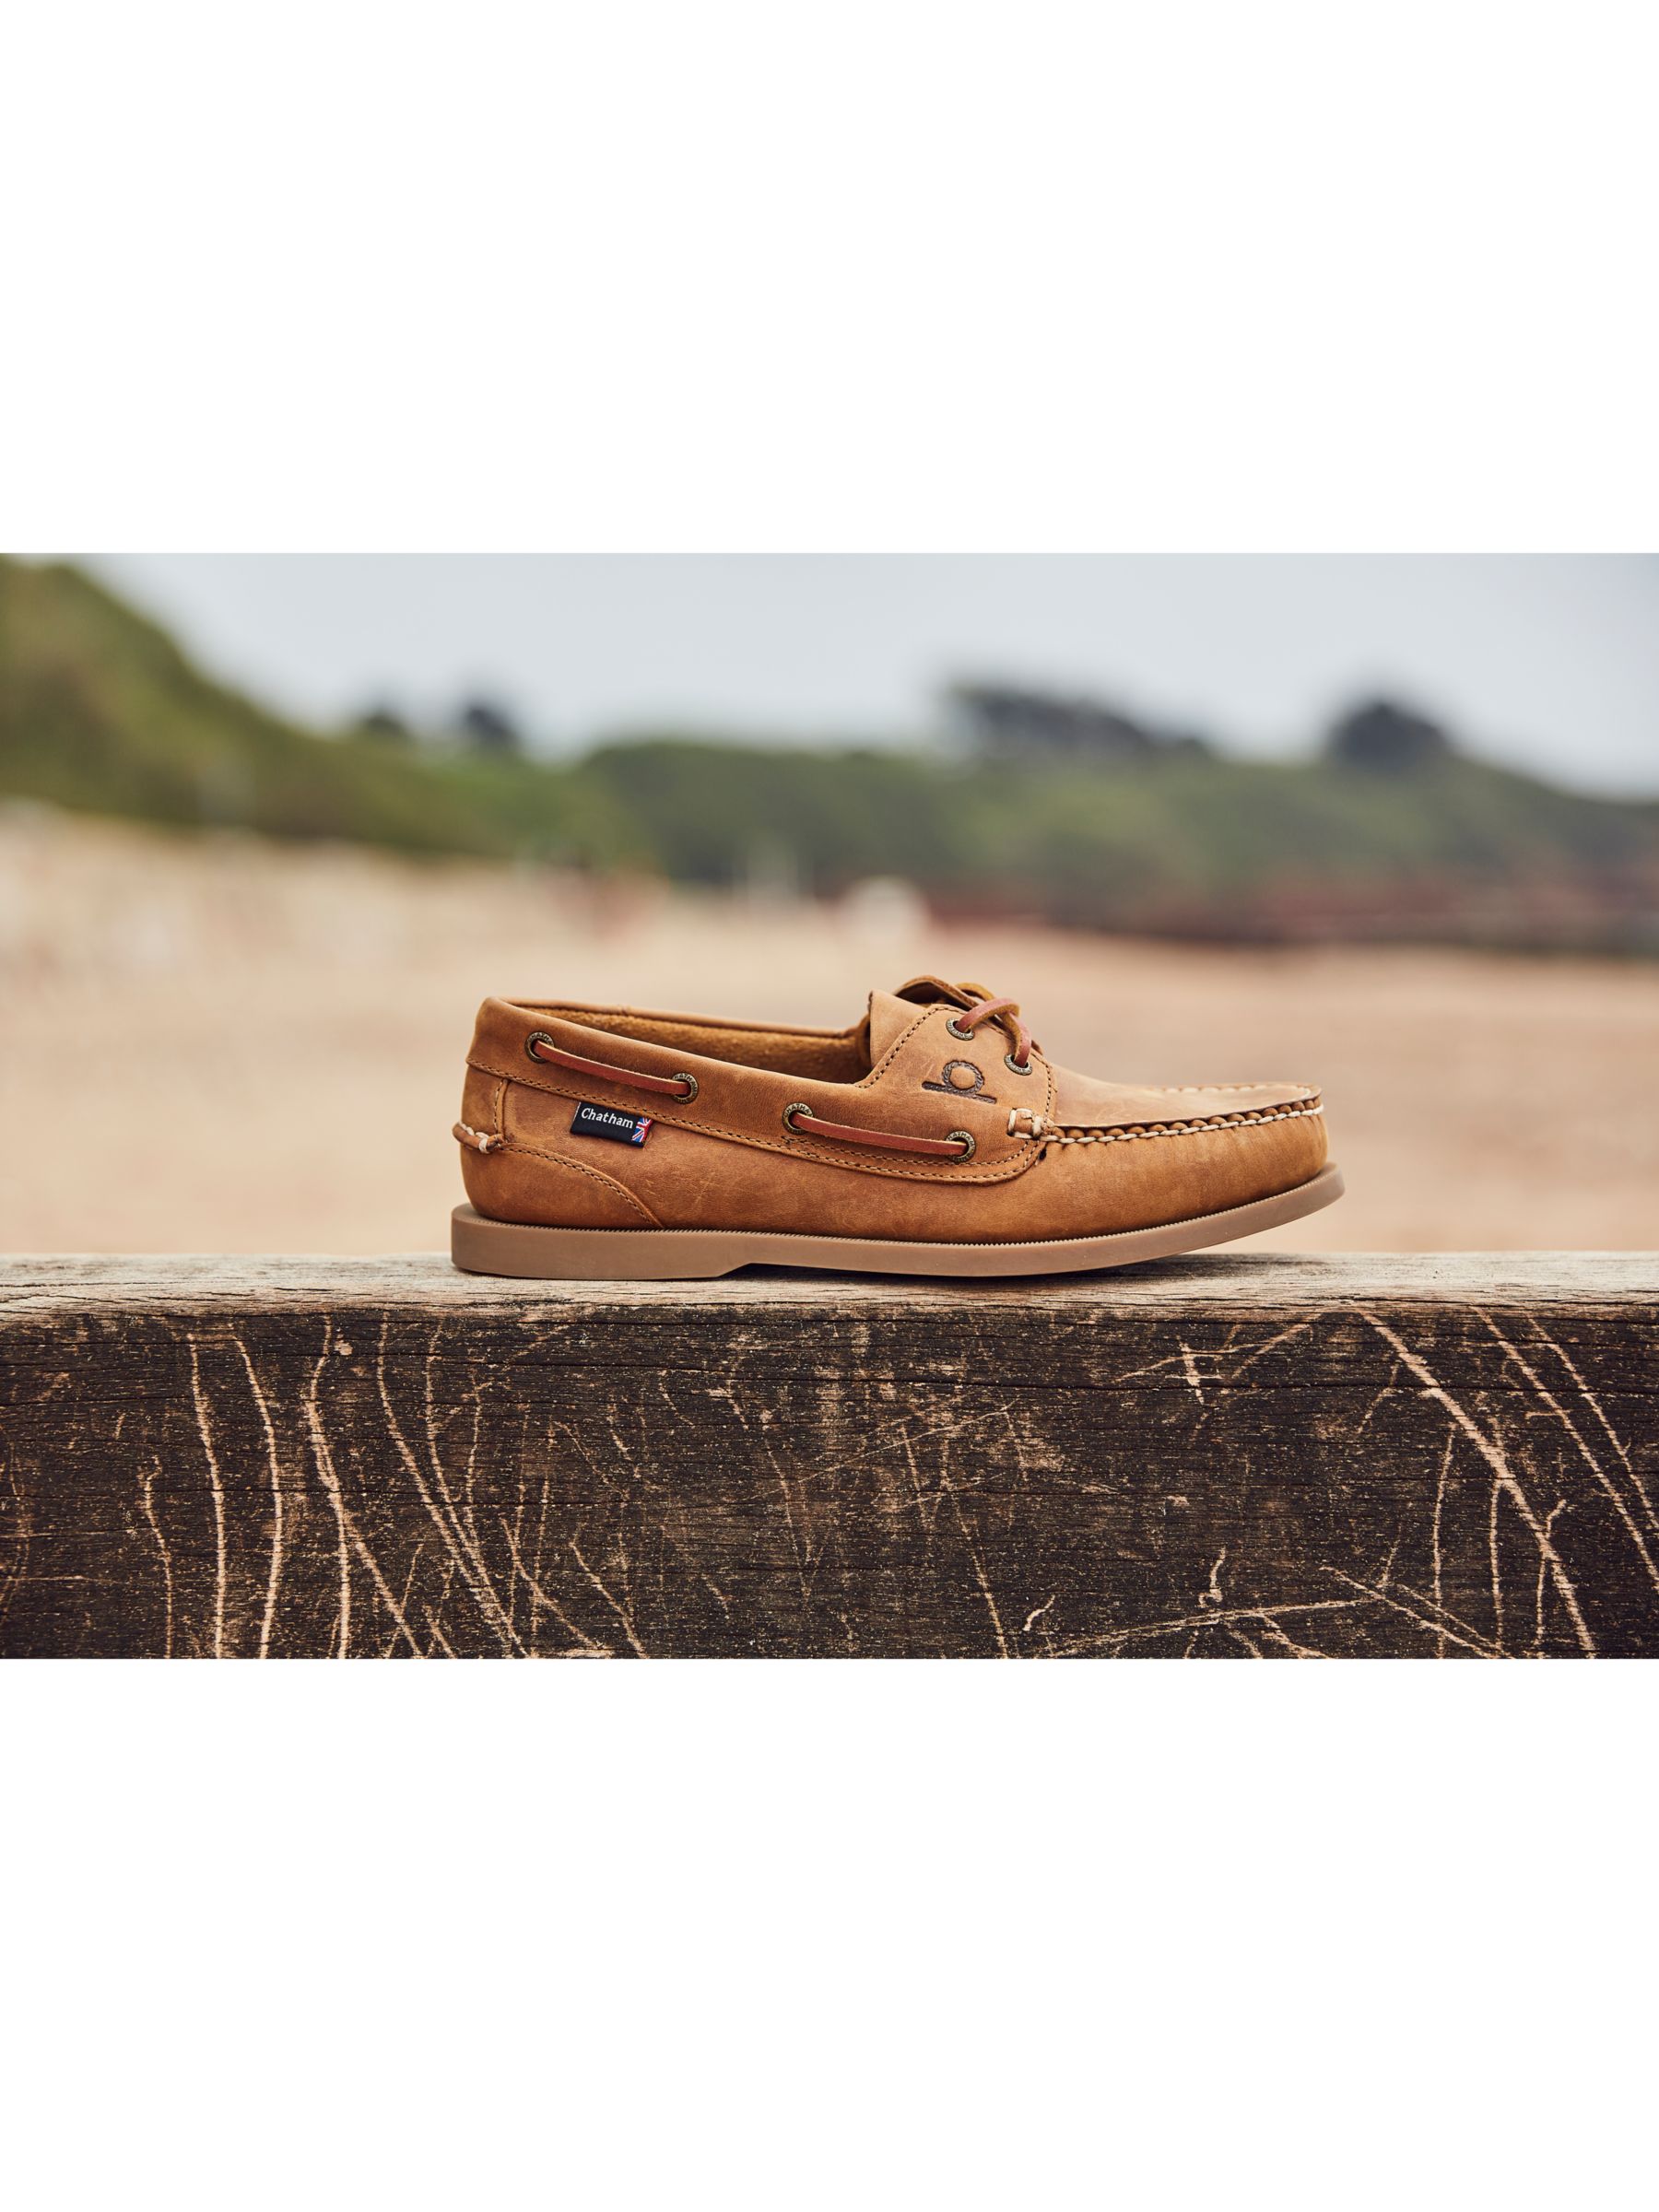 The Deck II G2, Mens Leather Boat Shoes